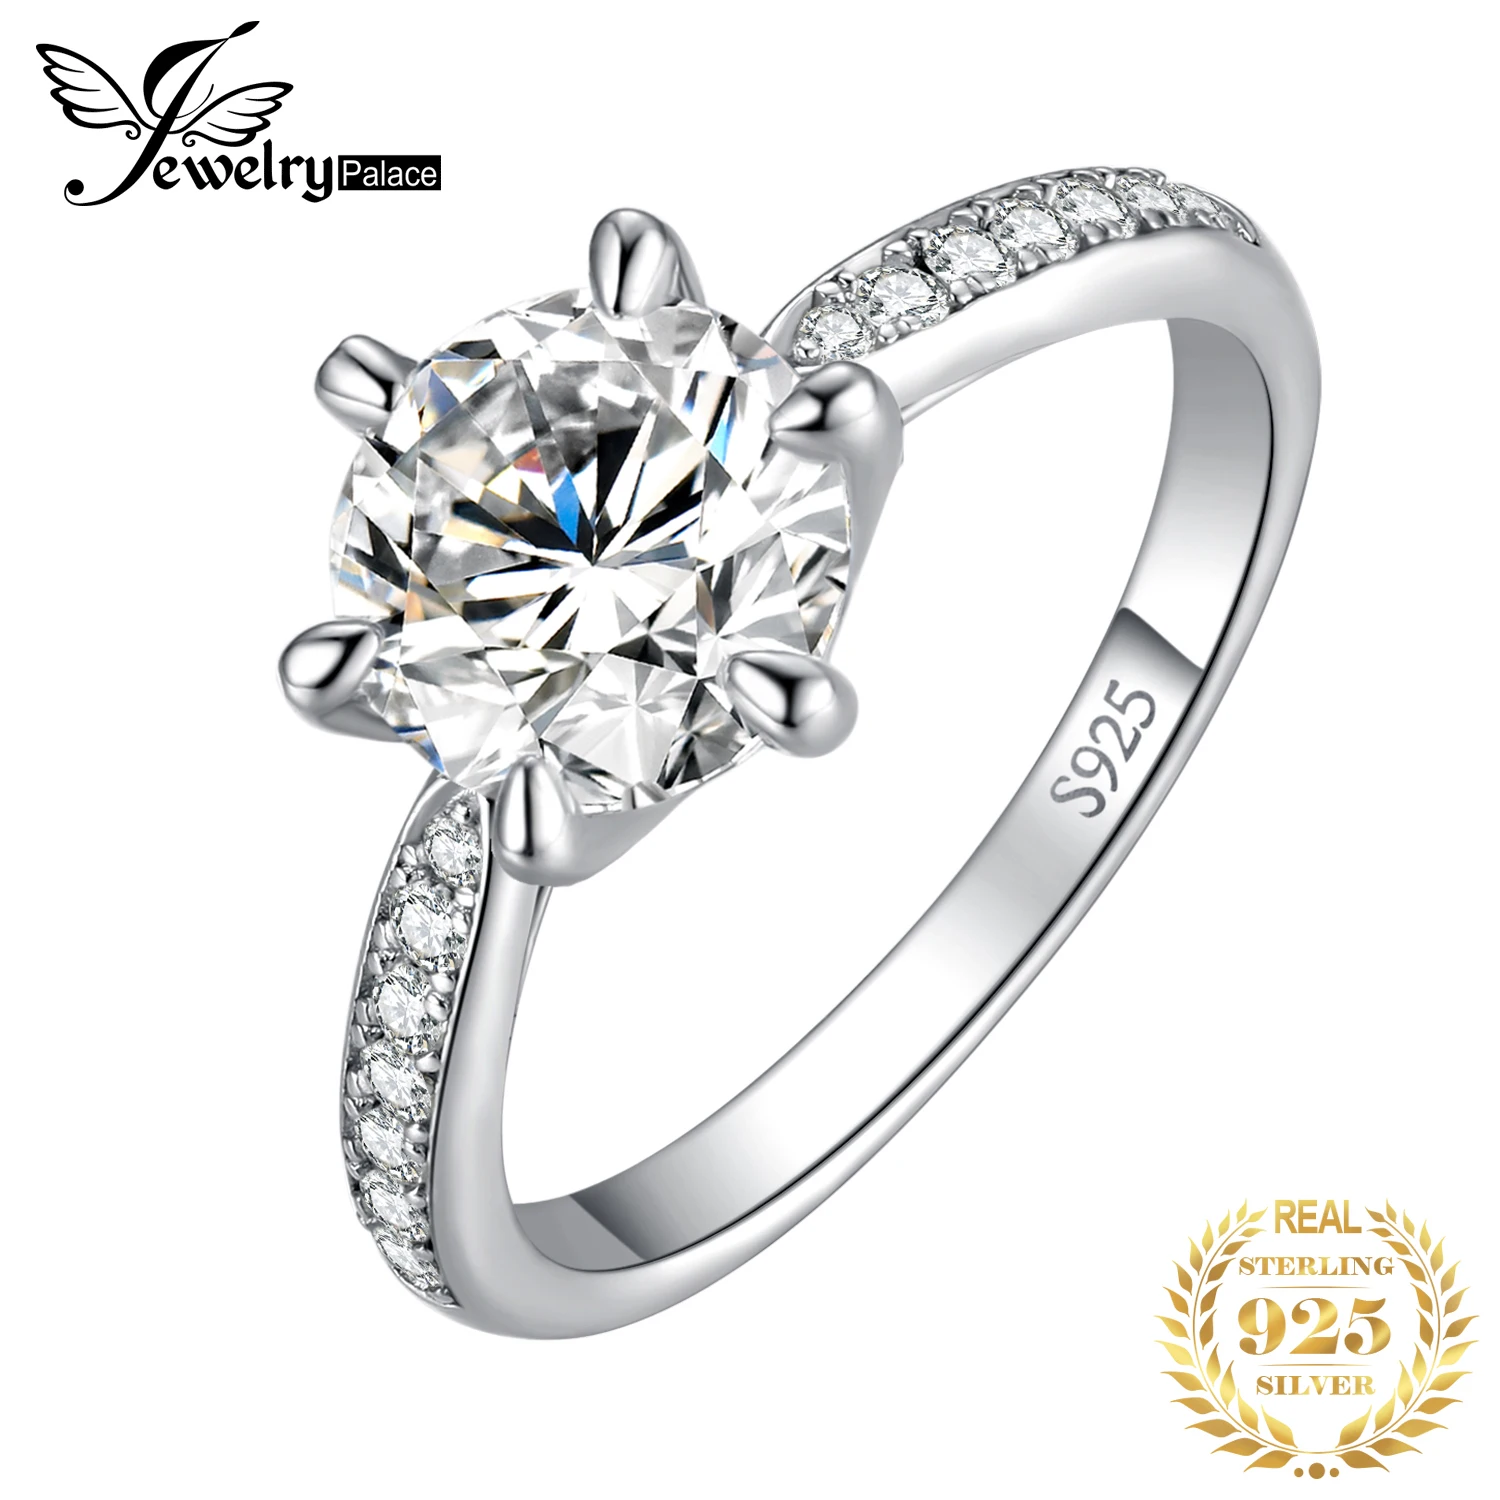 

JewelryPalace Moissanite D Color 1ct 1.5ct 2ct 3ct Round S925 Sterling Silver Wedding Engagement Ring for Women